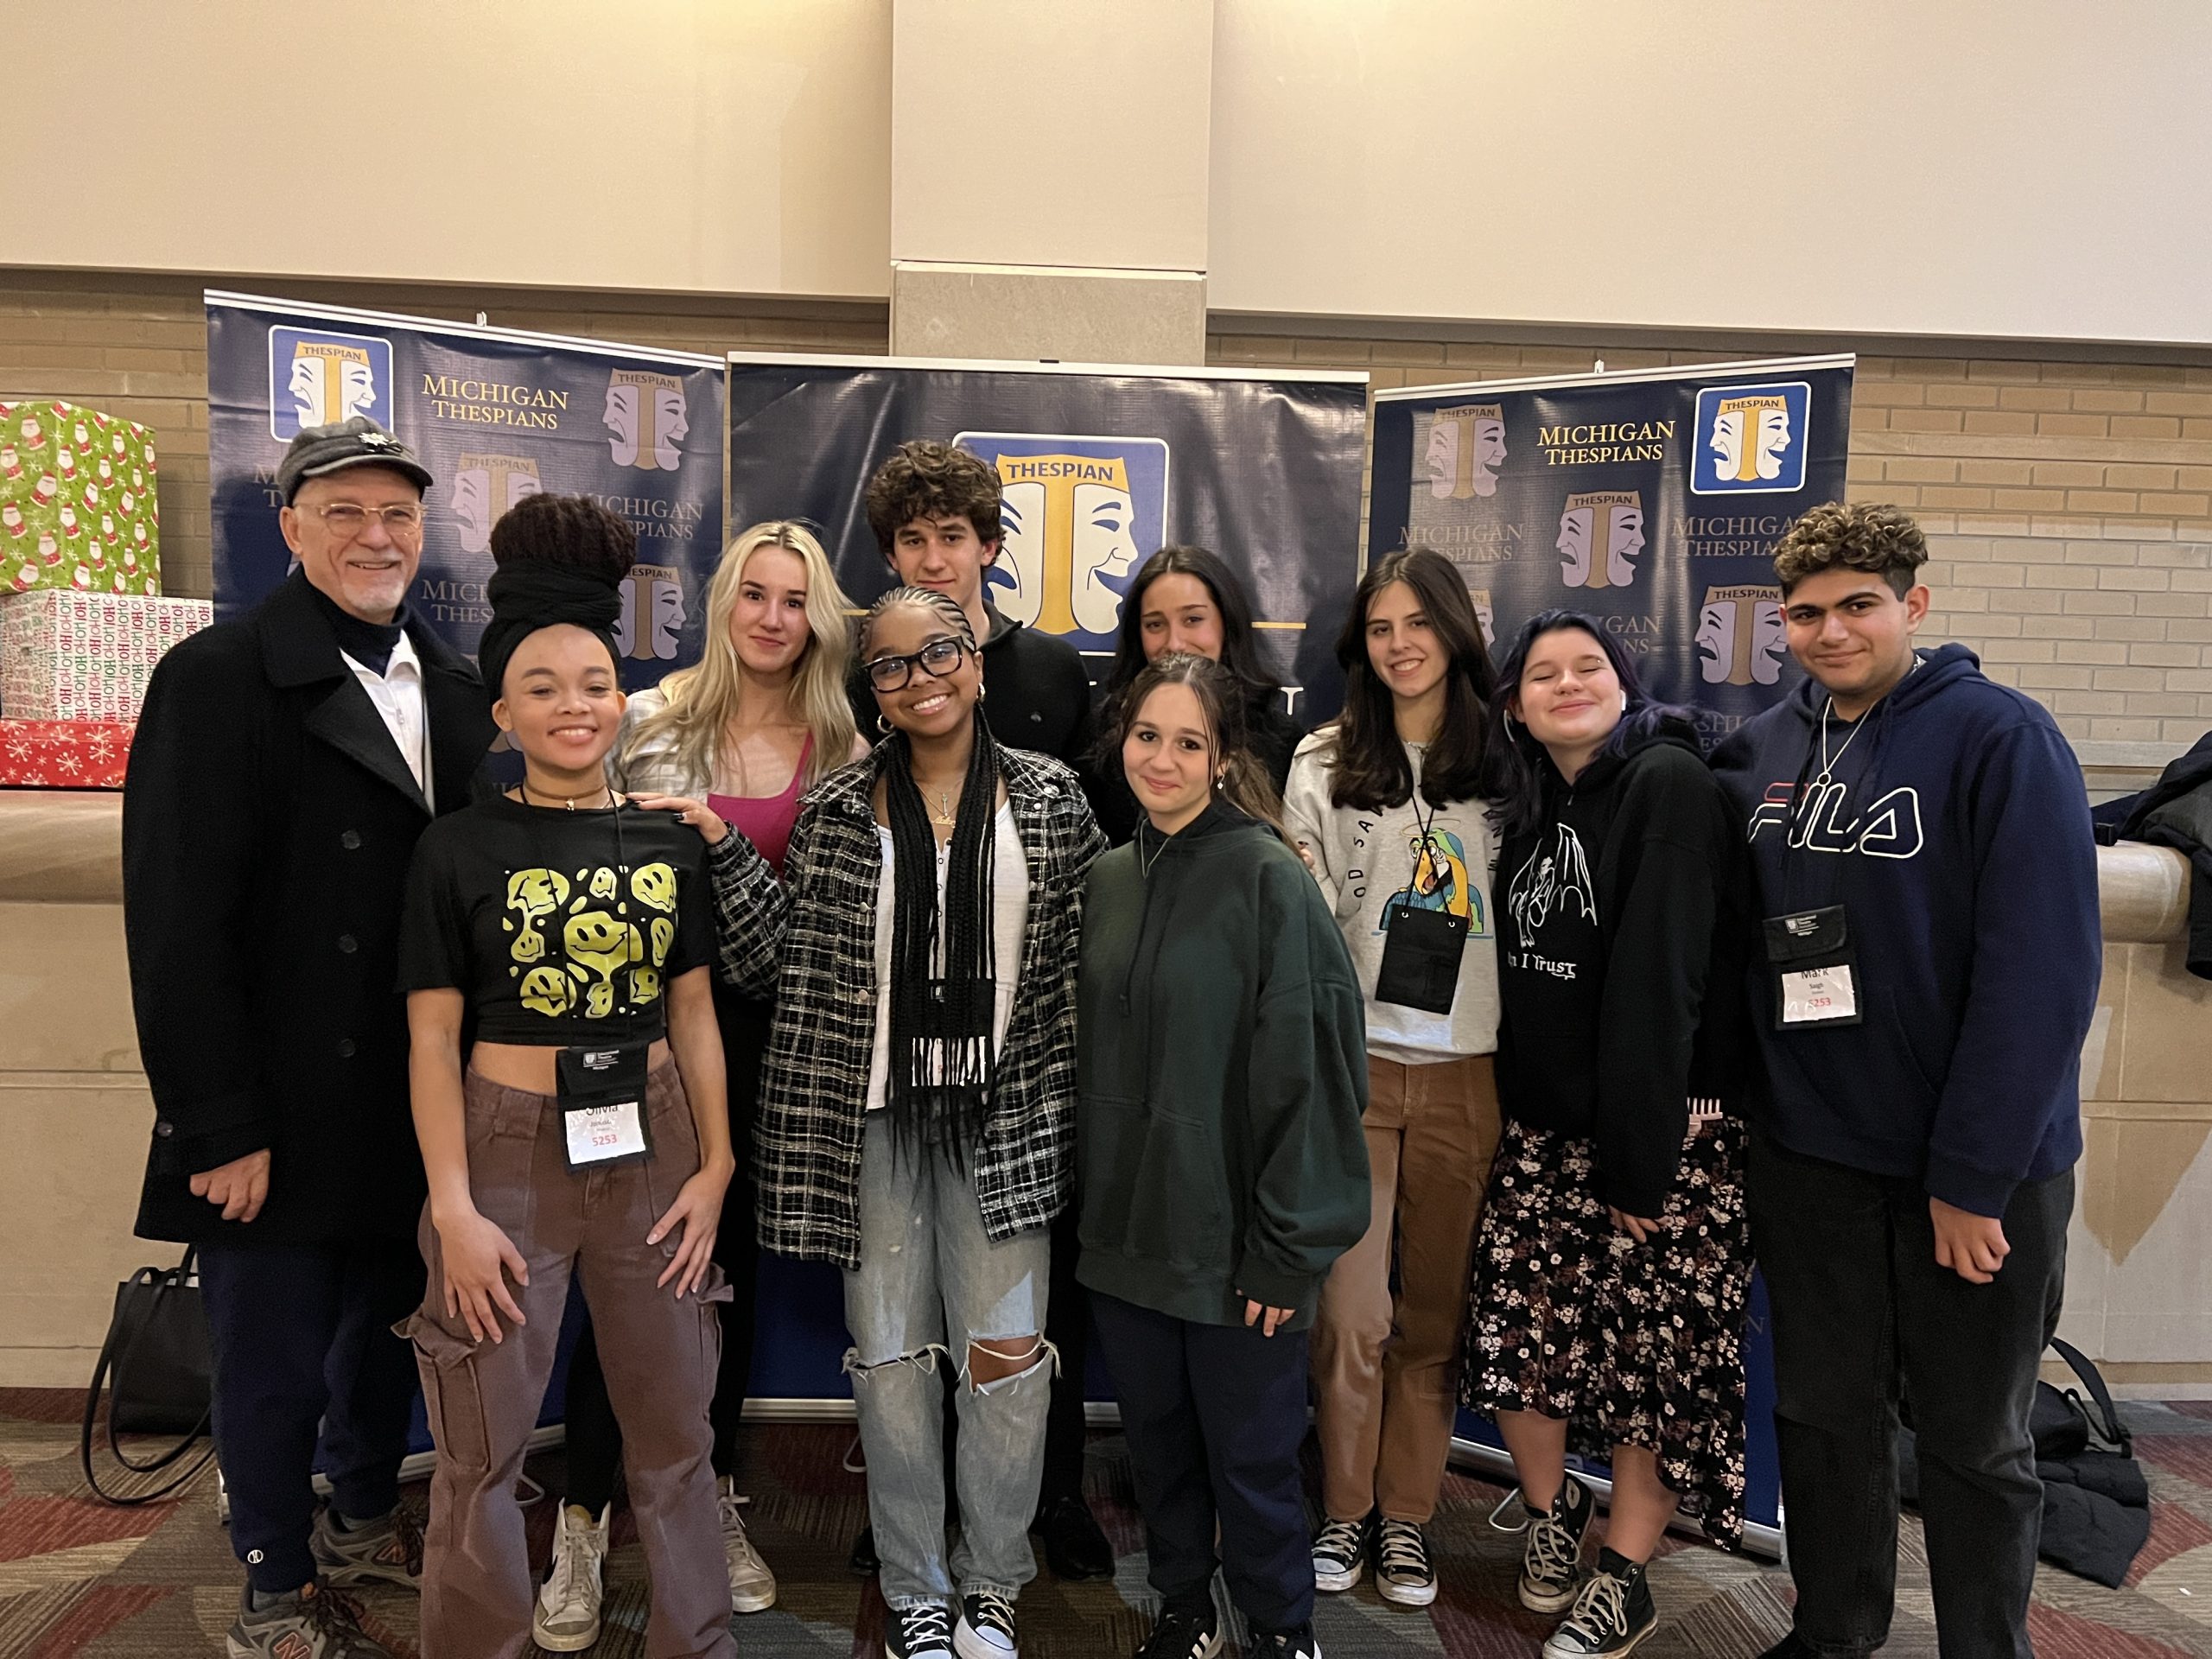 ULS students earn superior marks at Michigan Thespian Festival